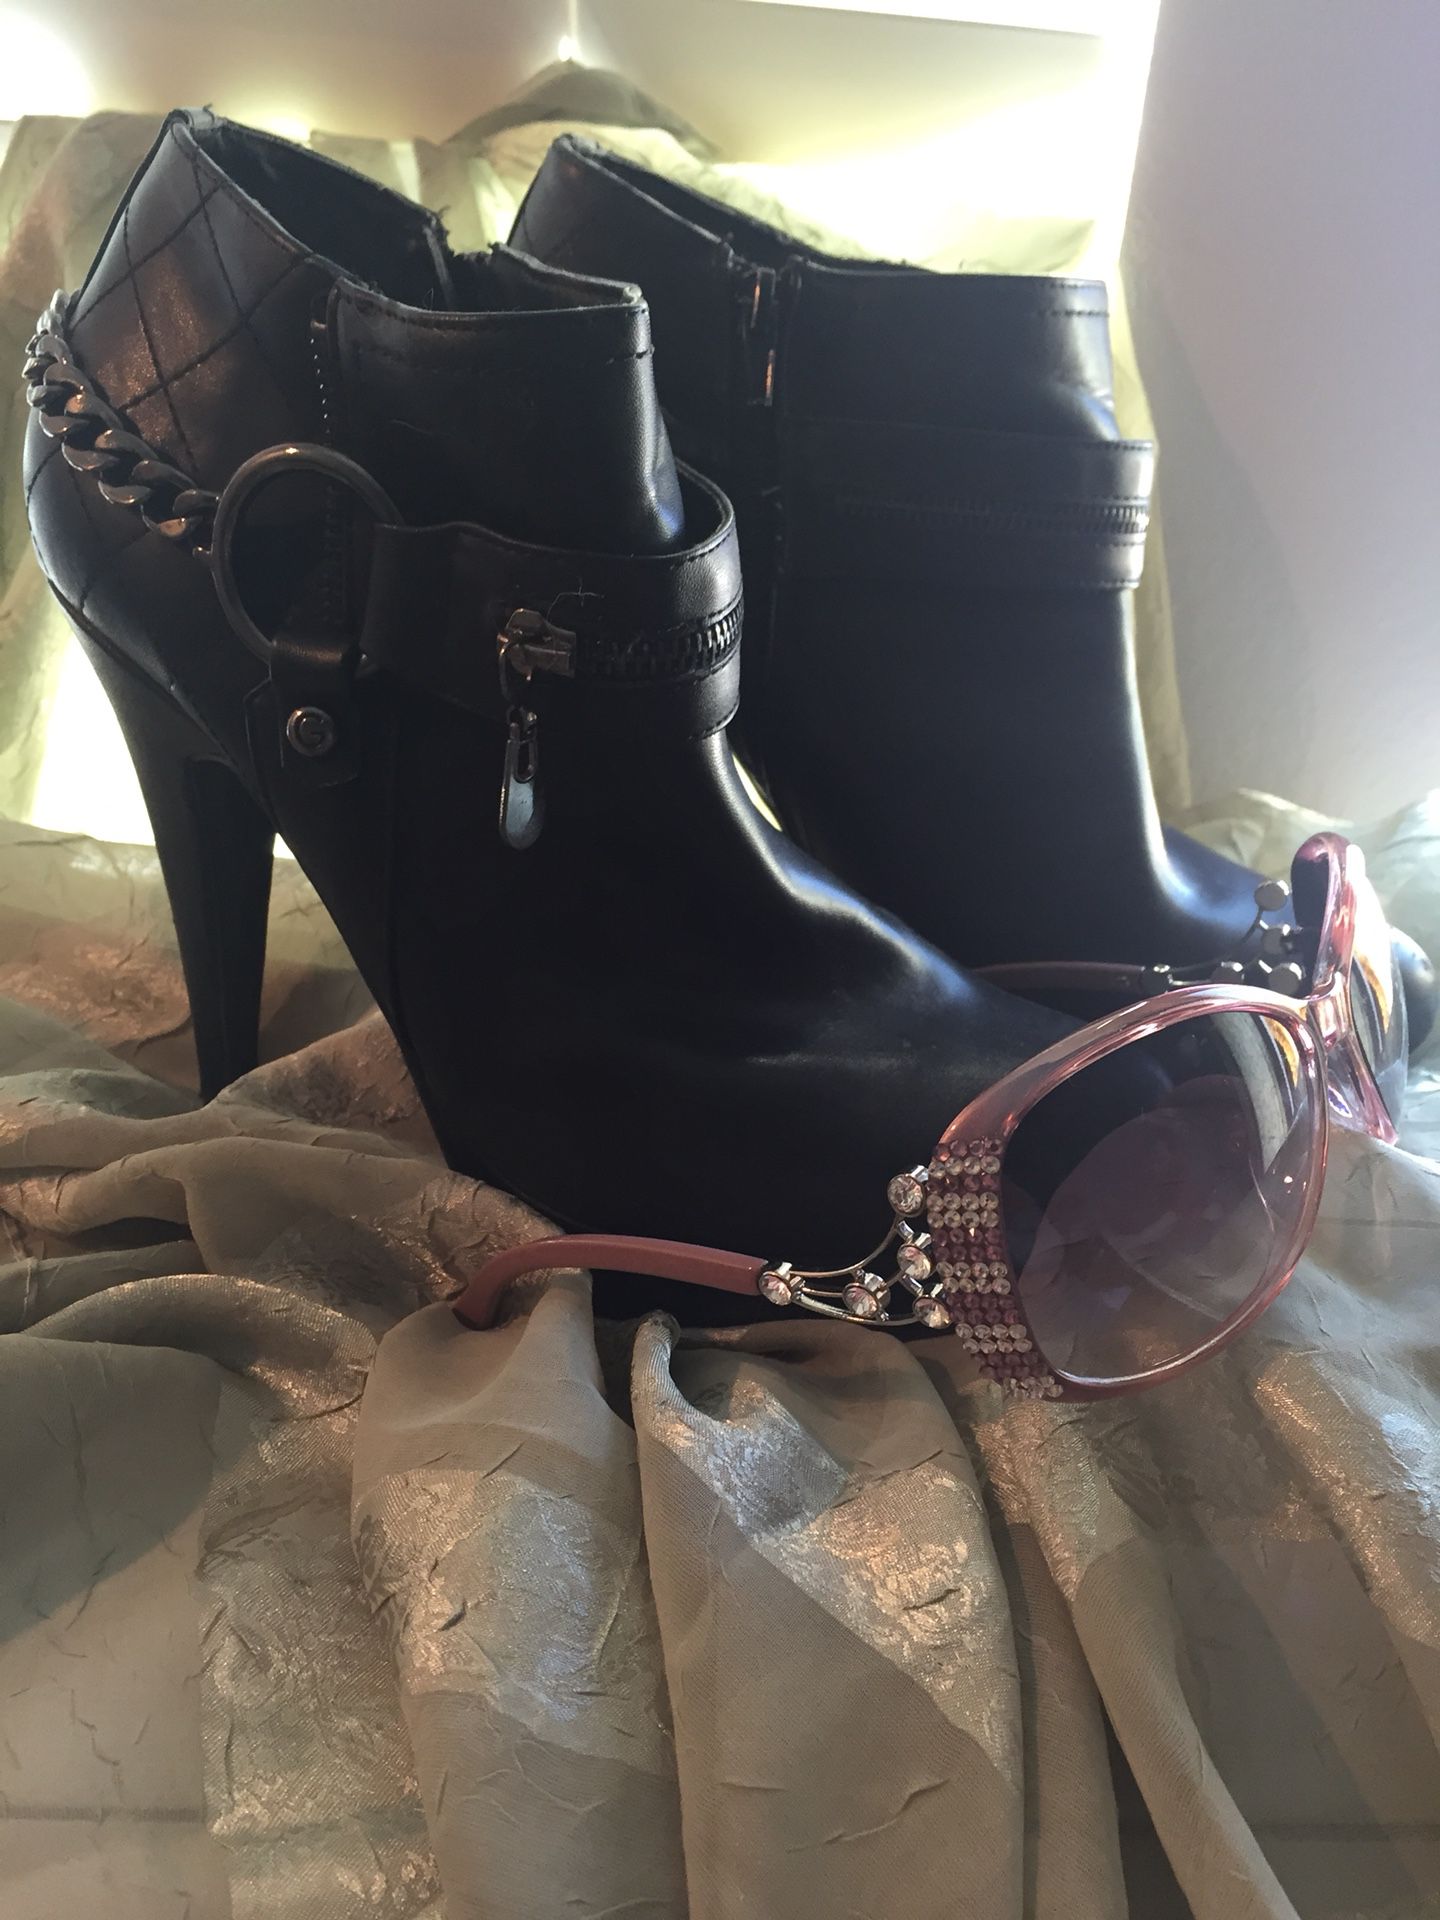 BLACK GUESS ANKLE BOOTS + FREE Bling Bling!!!